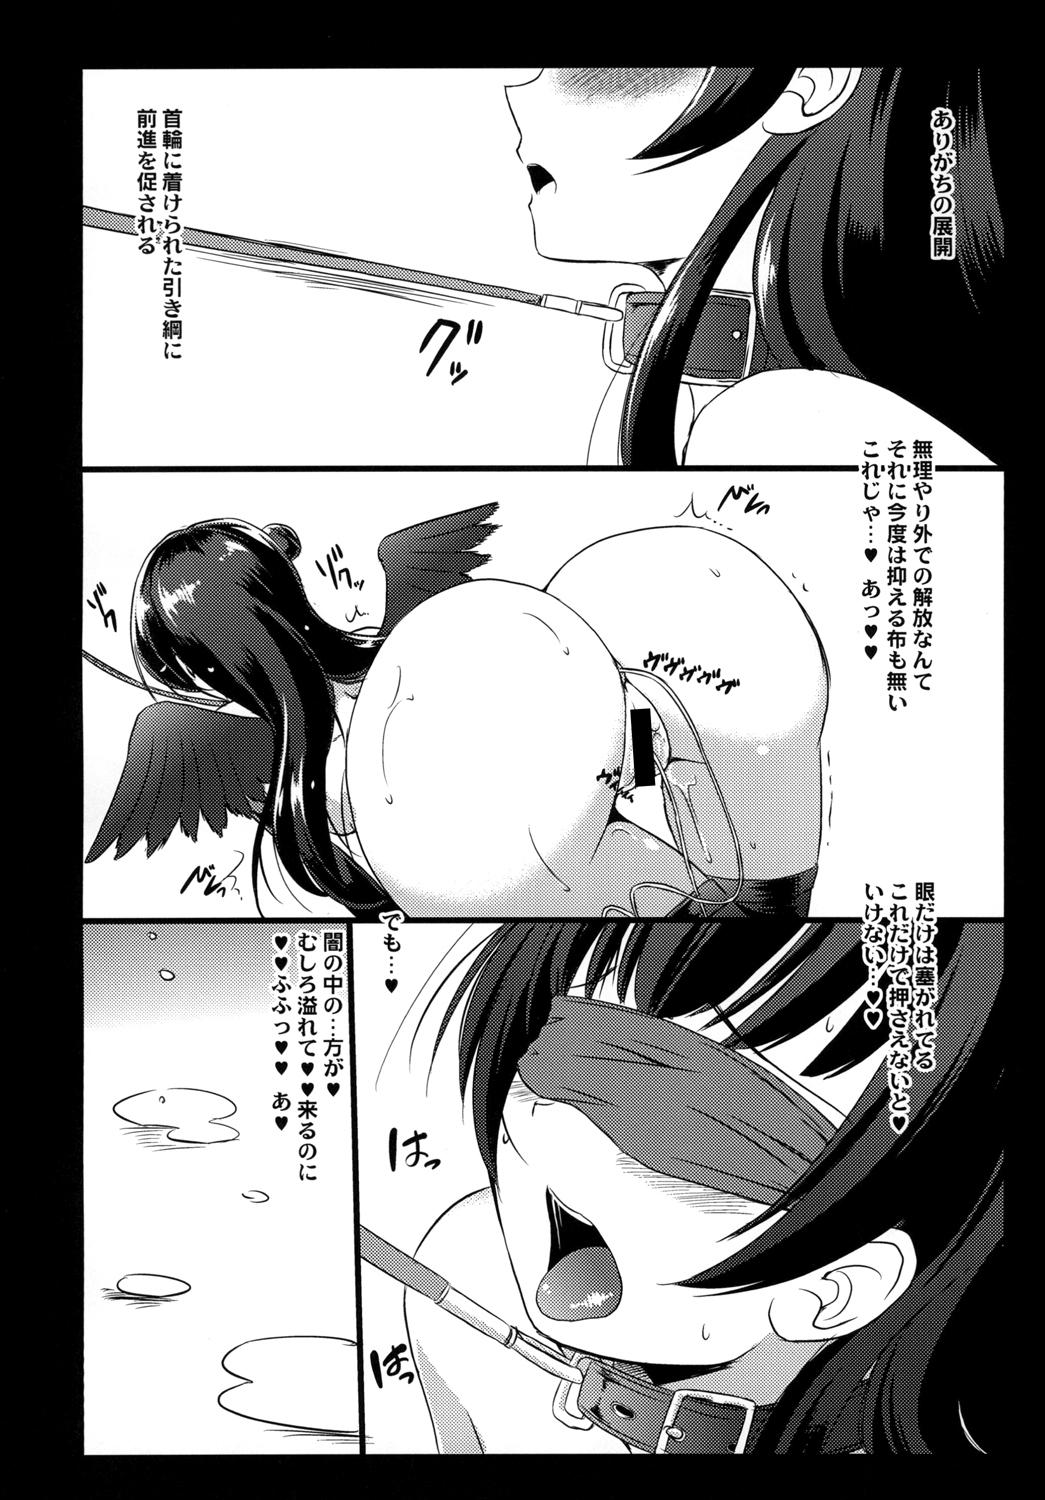 Asses LL-SO3 - Love live sunshine Cruising - Page 10